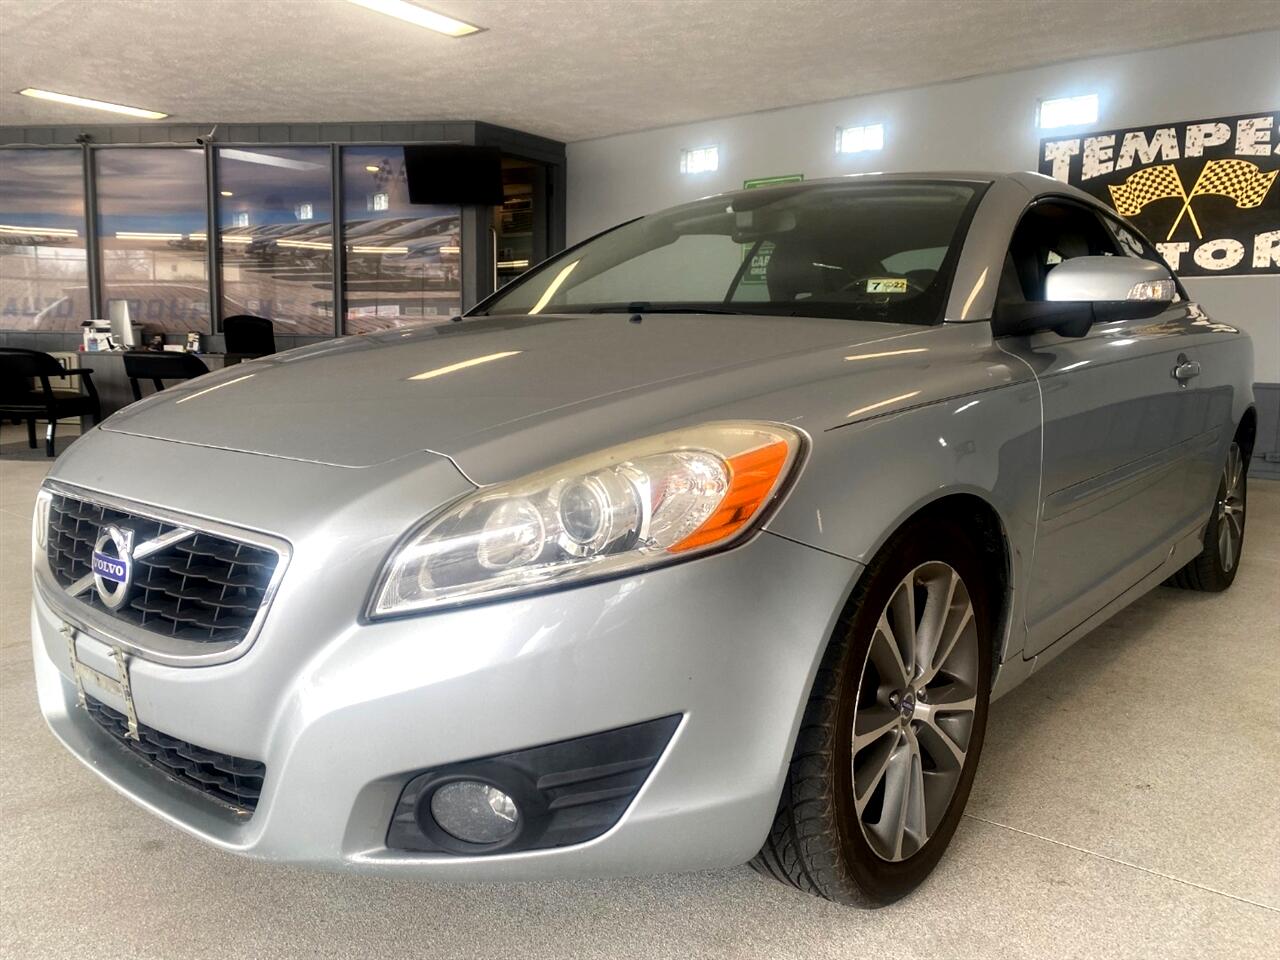 Used 2011 Volvo C70 2dr Conv Auto for Sale in Wadsworth OH 44281 Alpha Auto  Group of Wadsworth